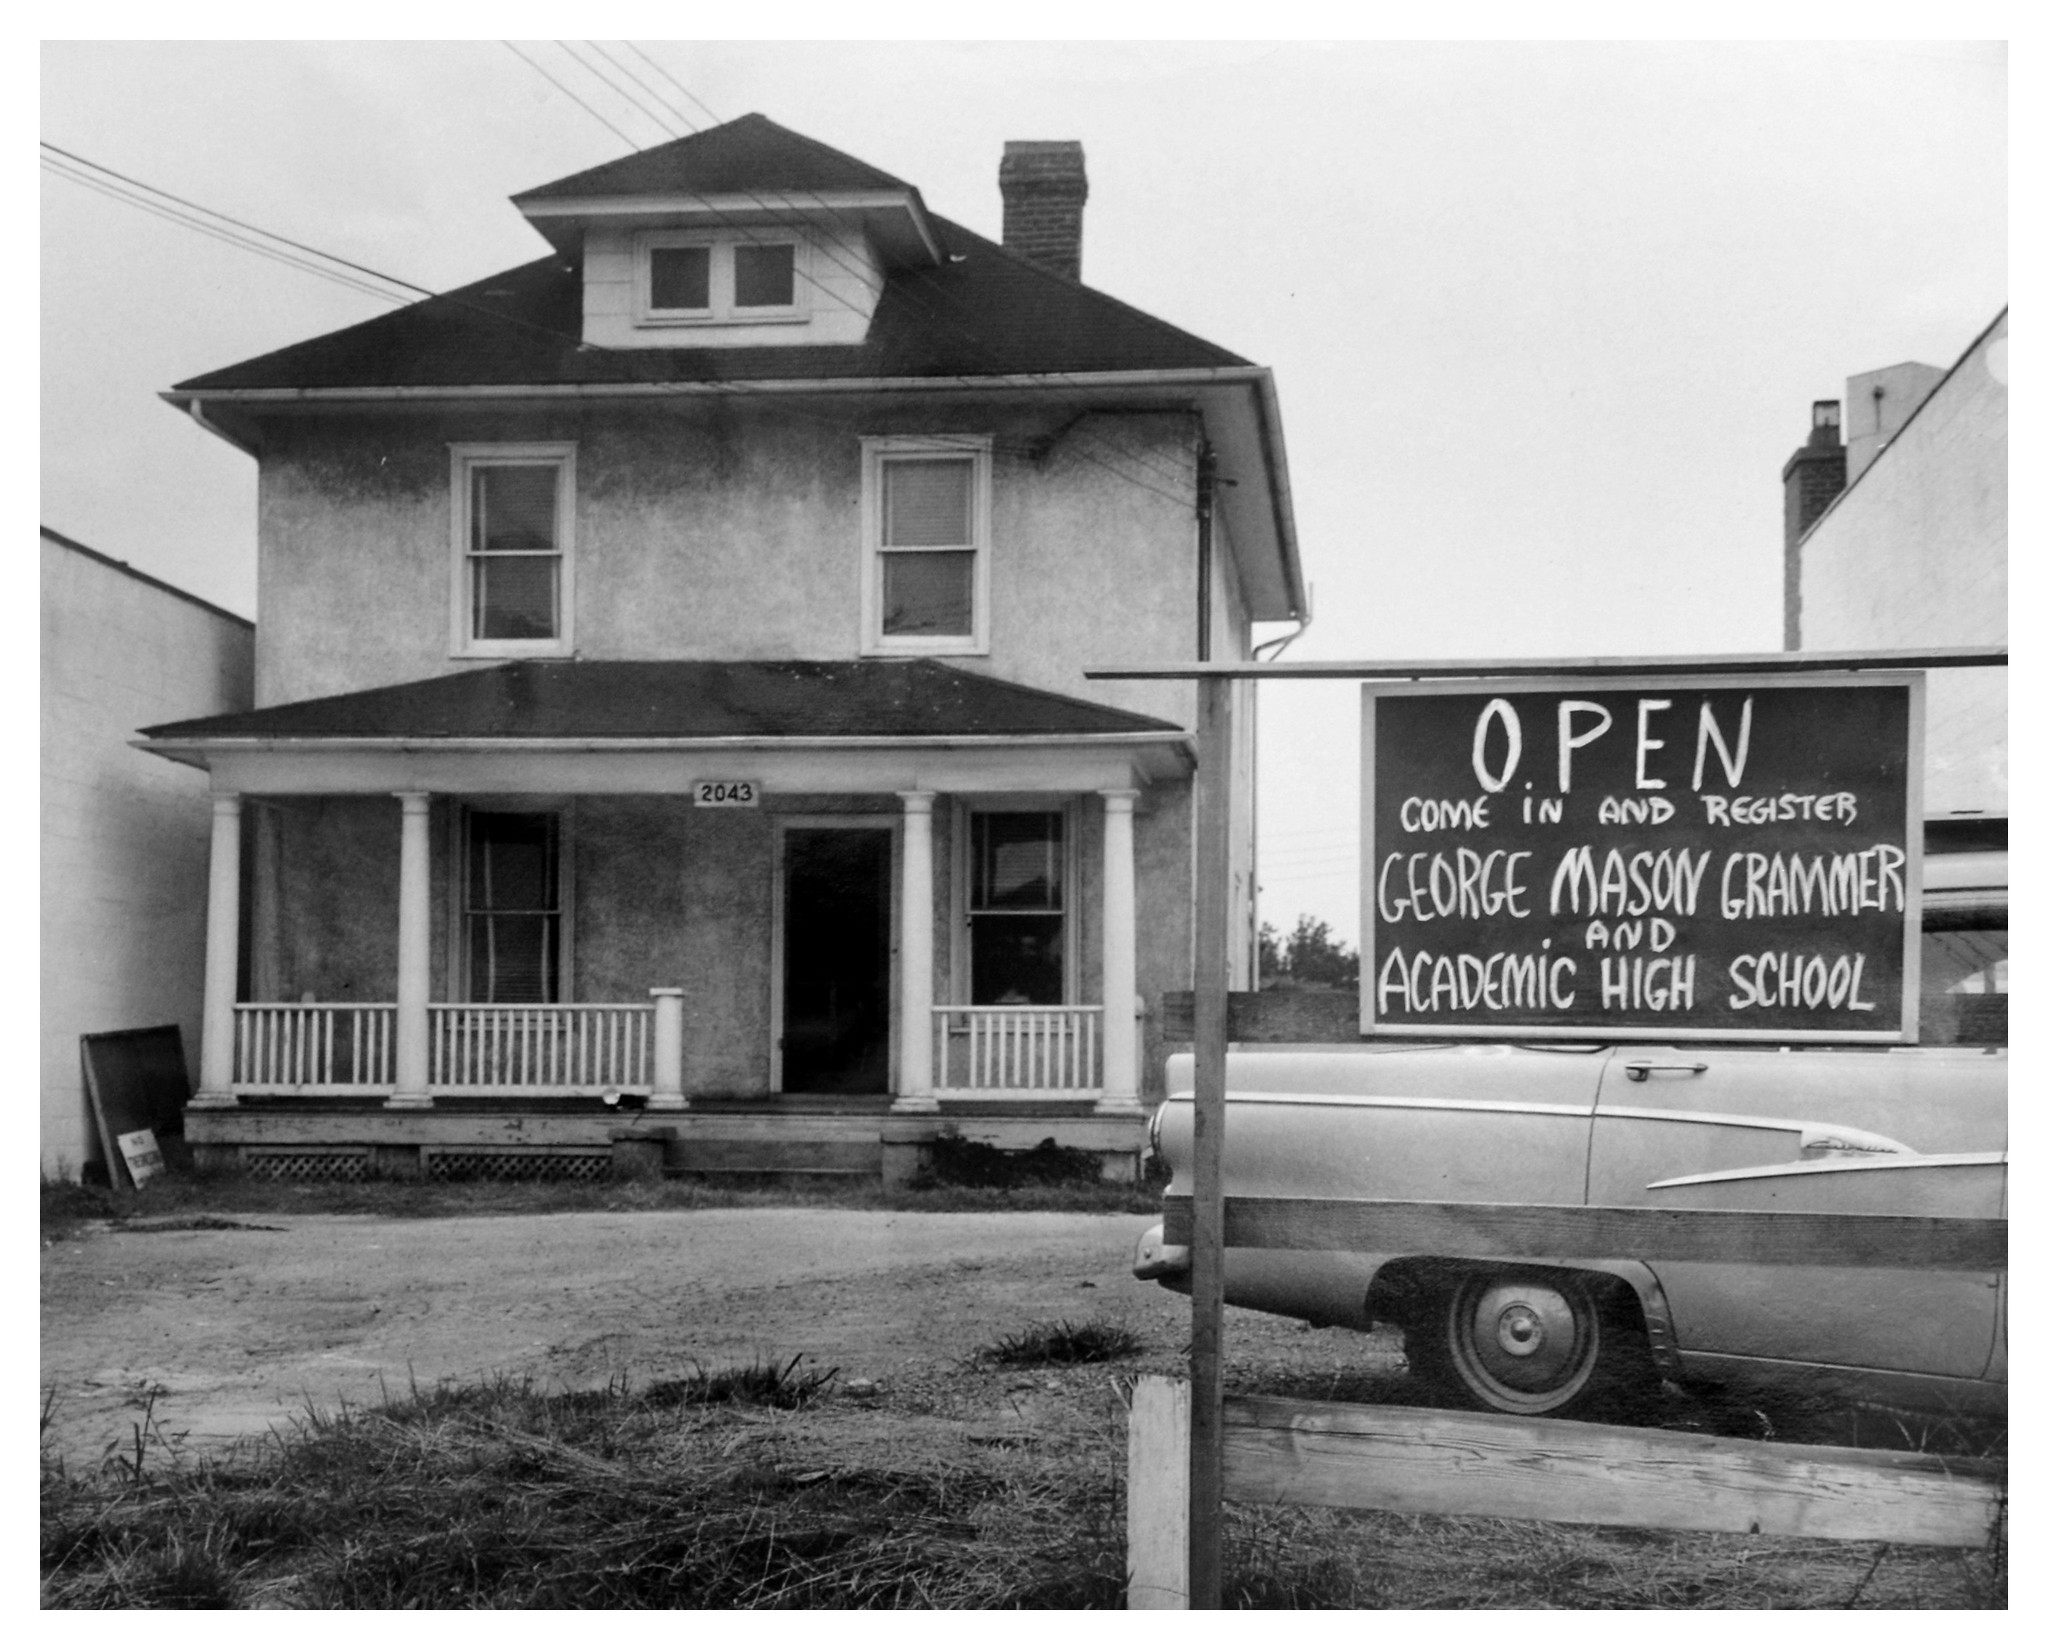 A building in Arlington selected to serve as a whites-only school in the event the state of Virginia closed Arlington’s public schools to resist desegregation, July 17, 1958. Whites-only “segregation academies'' became common across the South. Note the misspelling (“grammer'') on the sign. Source: DC Public Library, Star Collection © Washington Post.